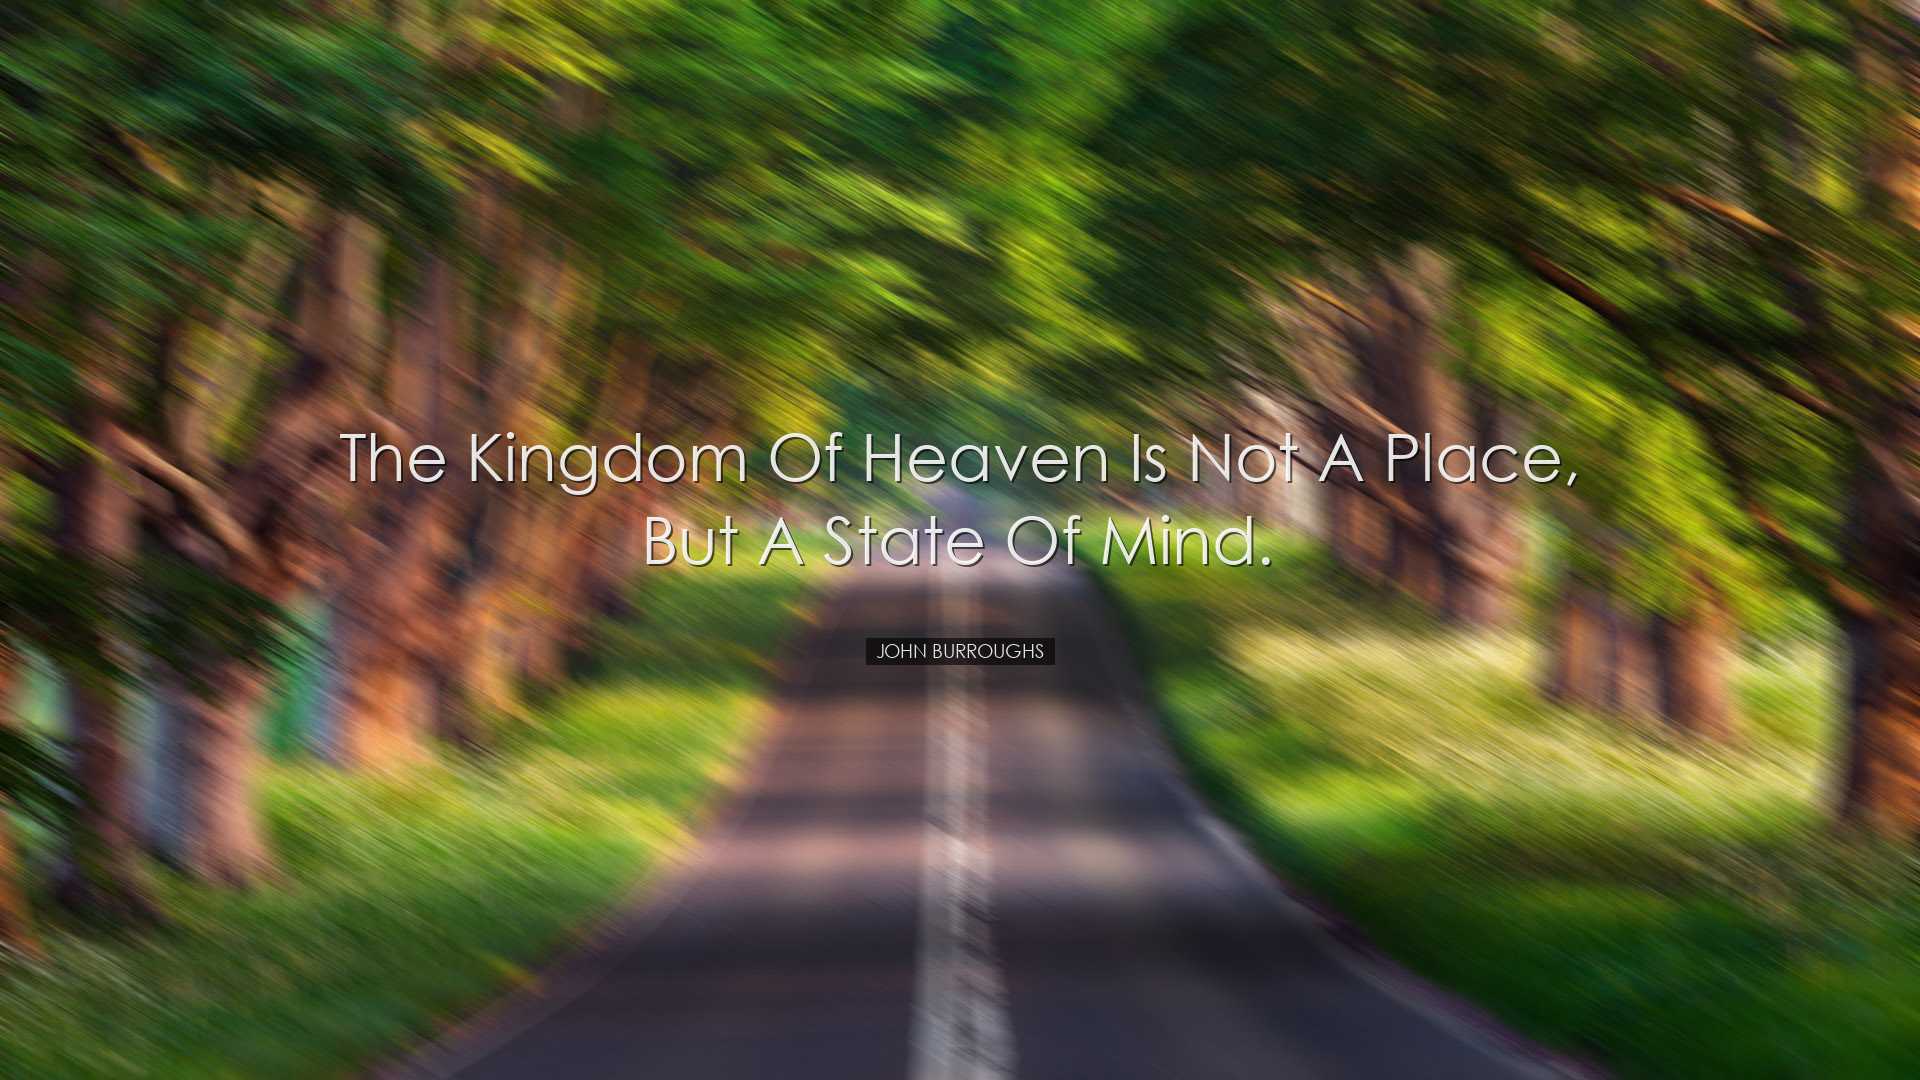 The Kingdom of Heaven is not a place, but a state of mind. - John